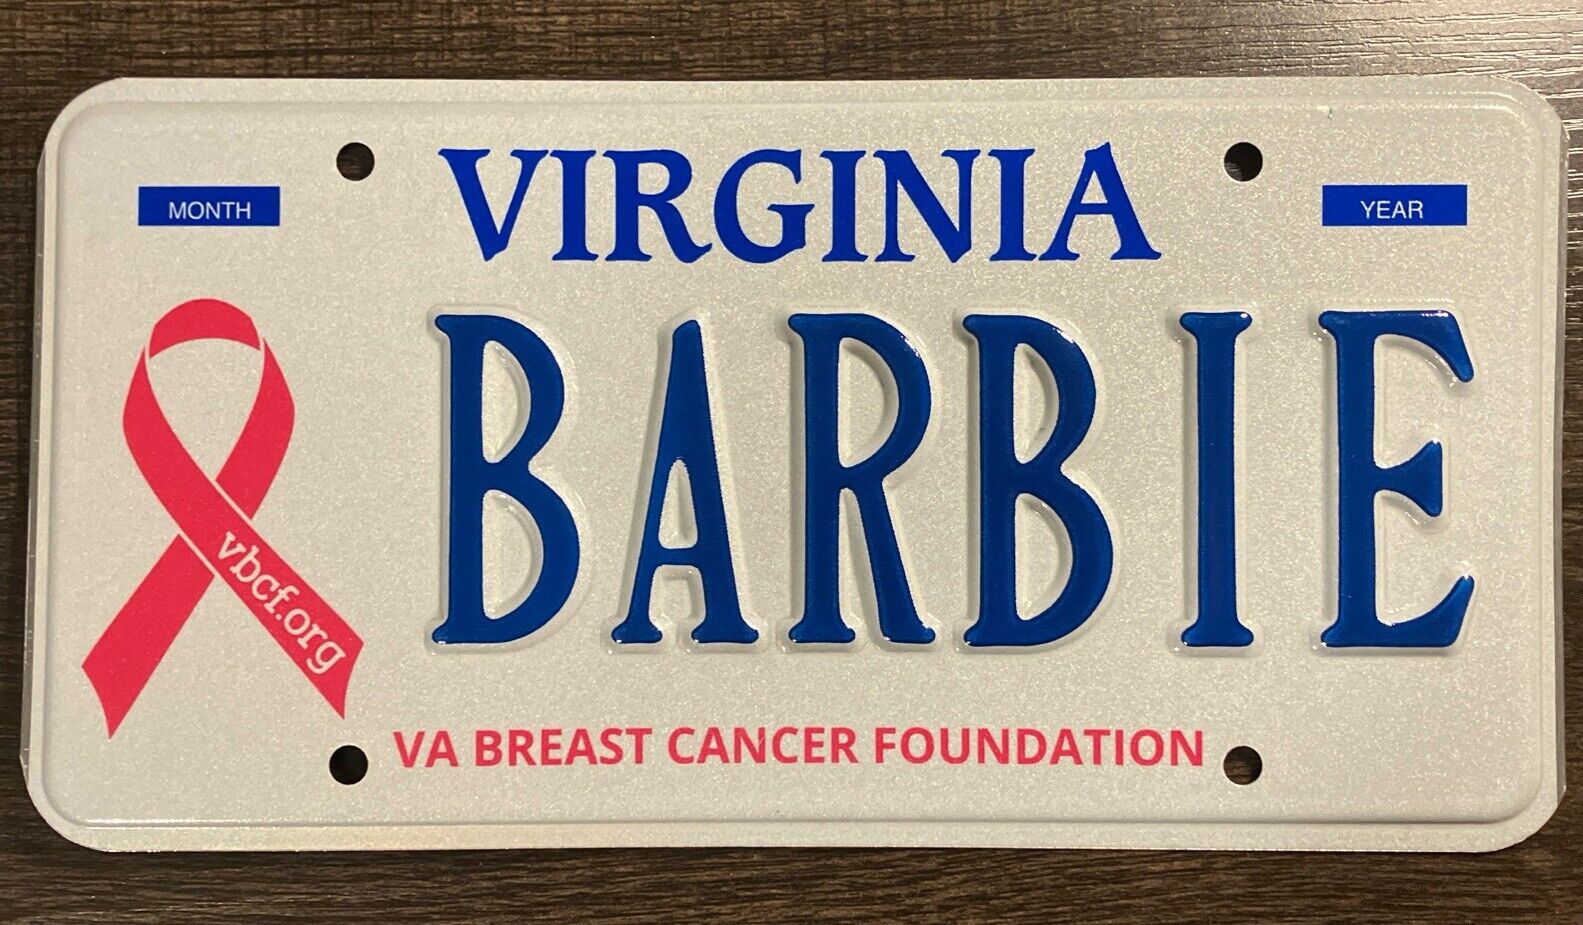 Virginia Personalized Vanity License Plate BARBIE Doll Breast Cancer Awareness